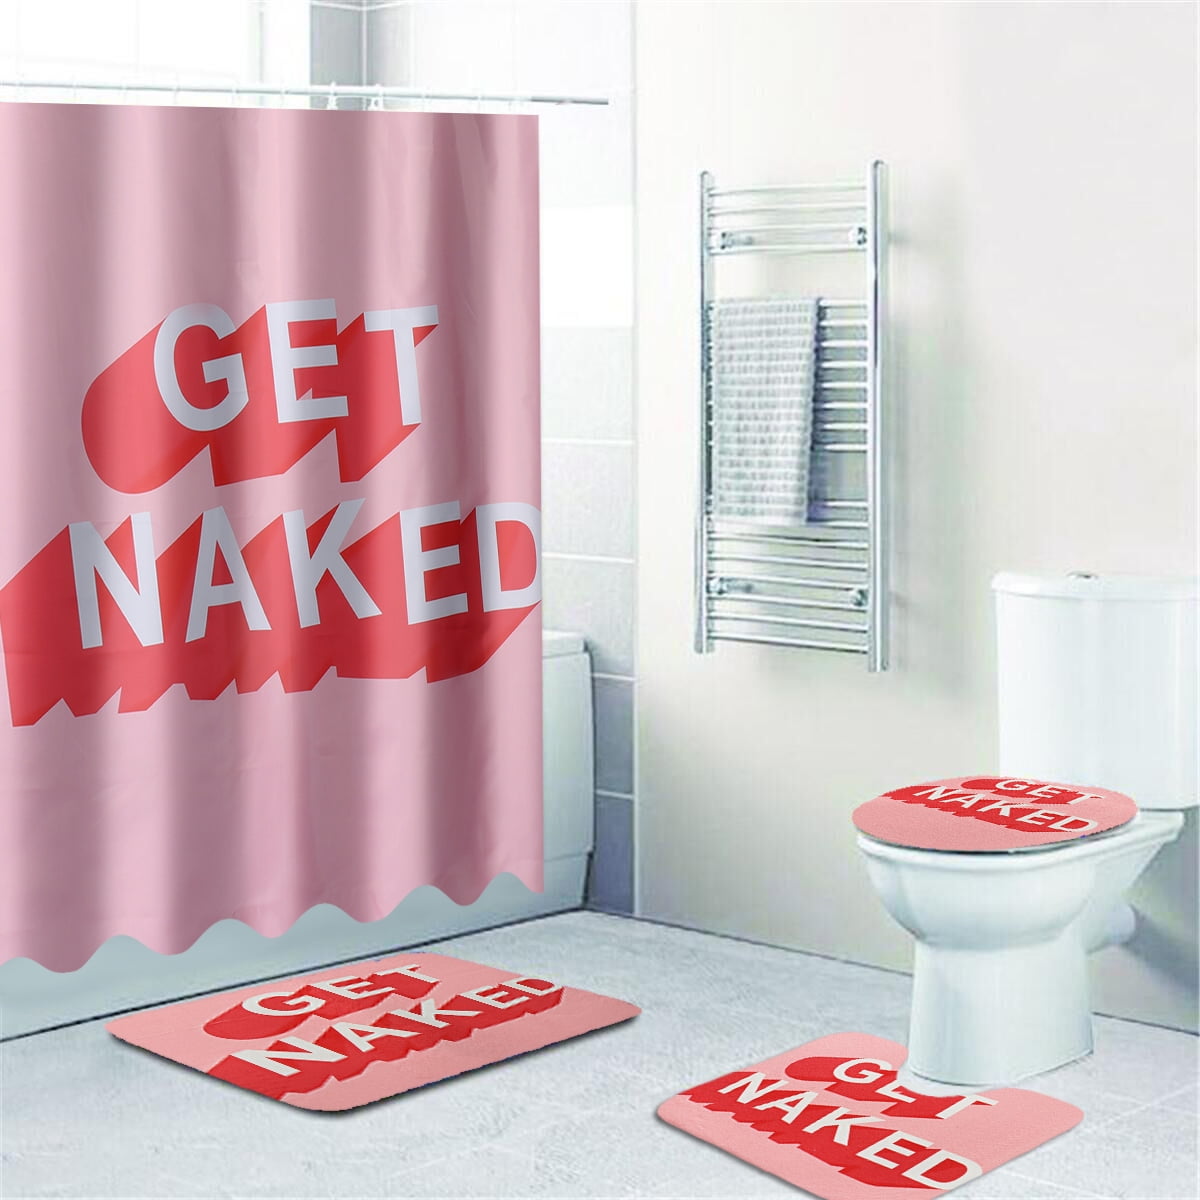 Pknoclan 4 Pcs Get Naked Shower Curtain Sets with Non-Slip Rug Toilet Lid and 